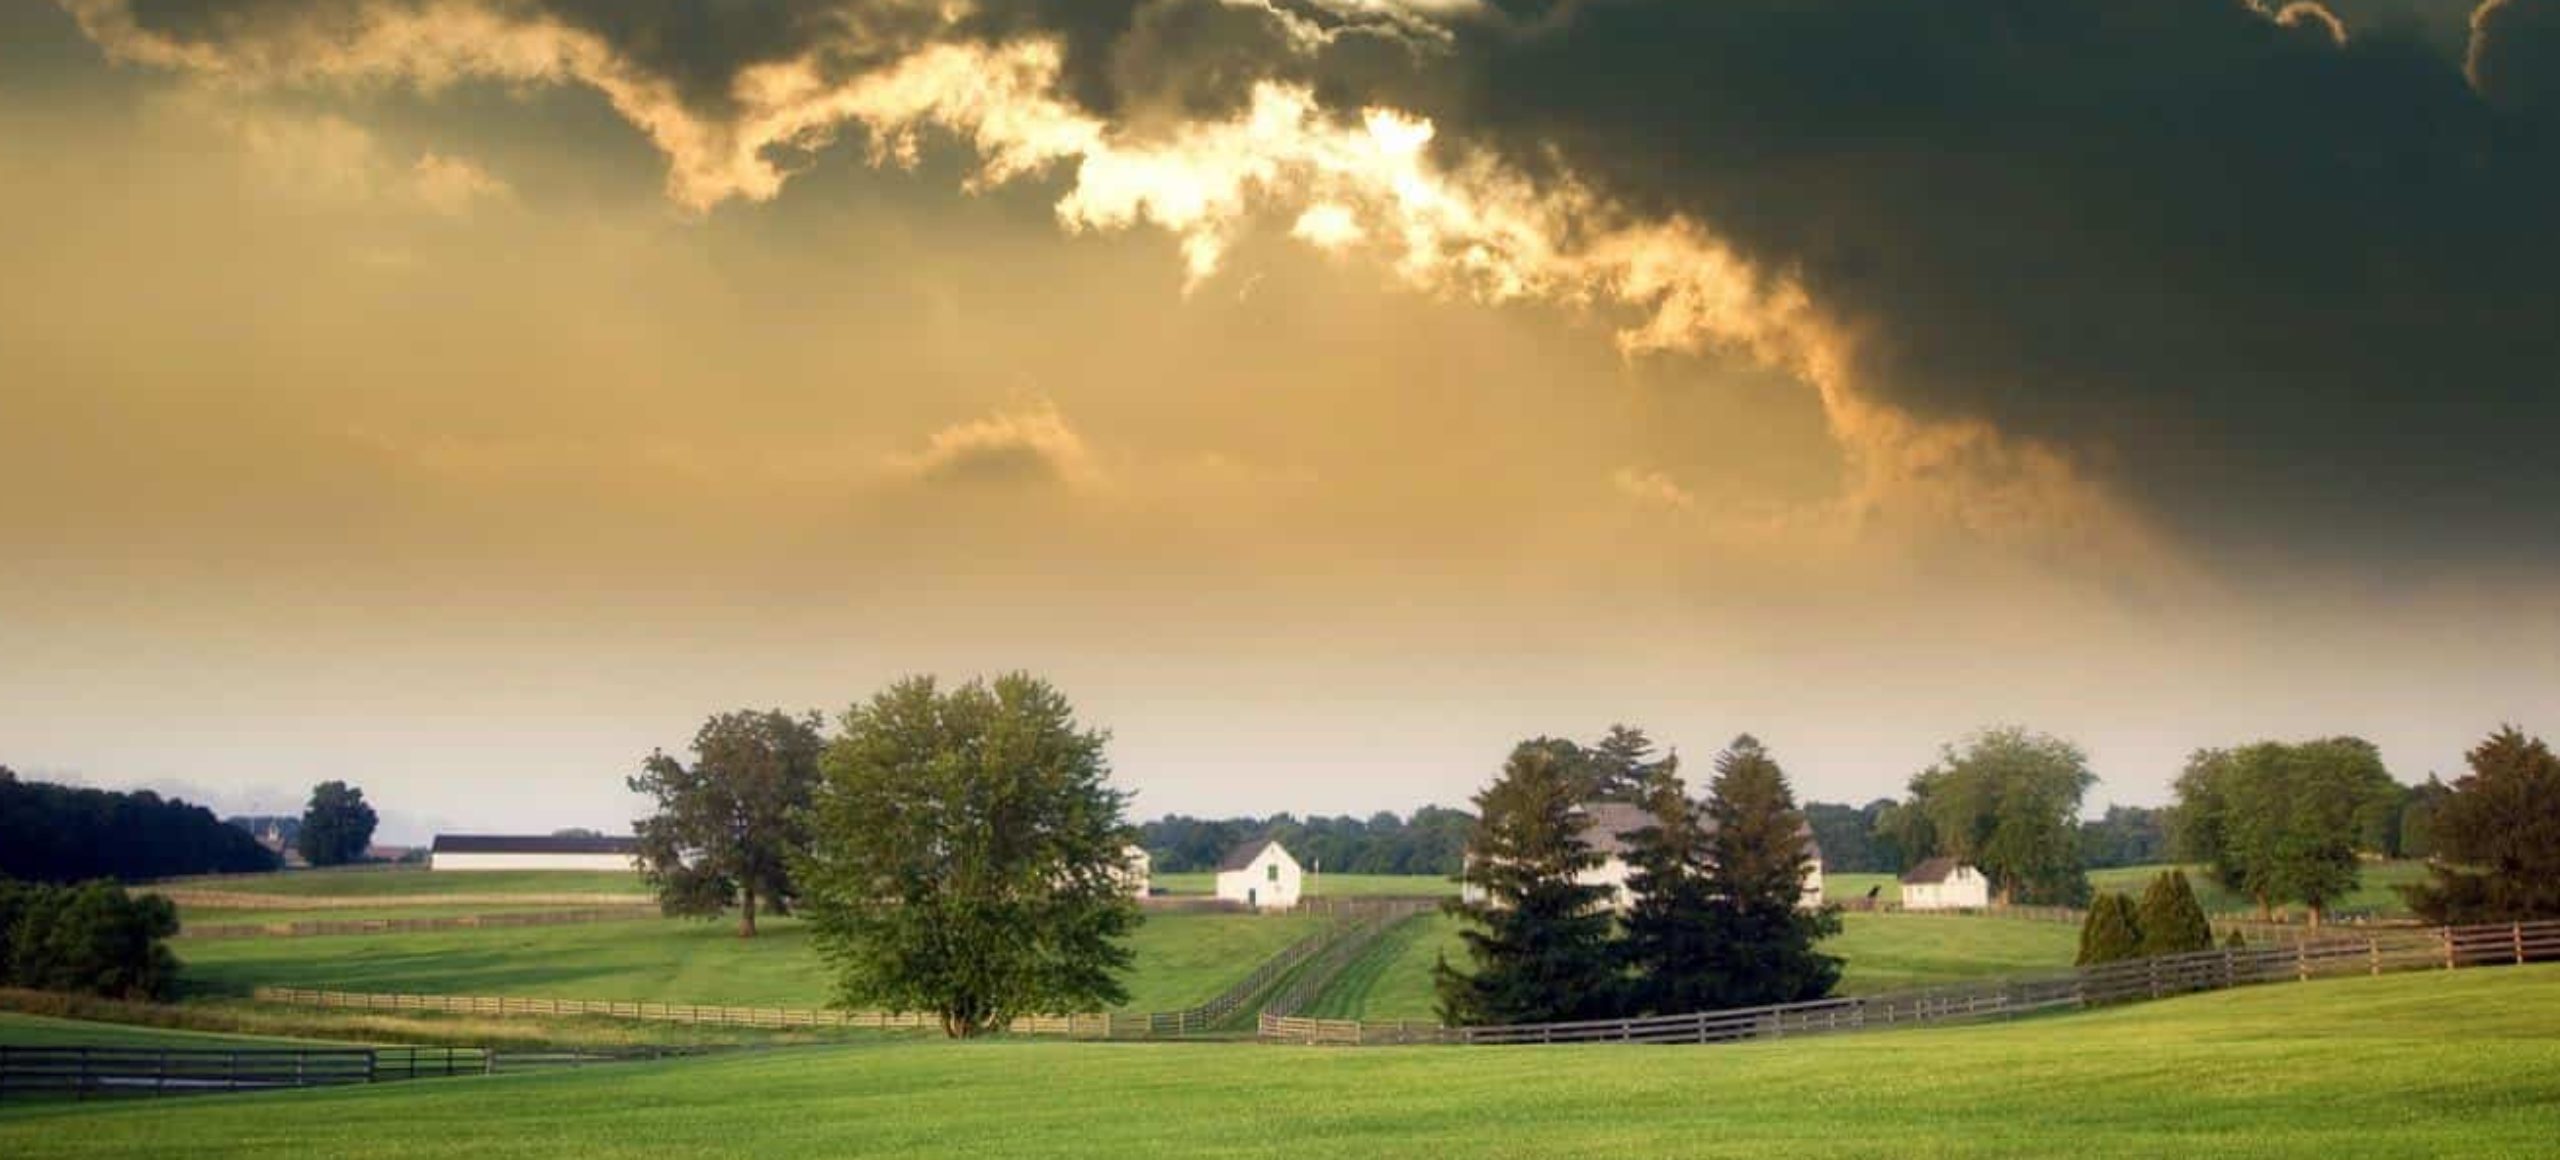 Sunset over a pastoral farm with green fields and farm buildings.